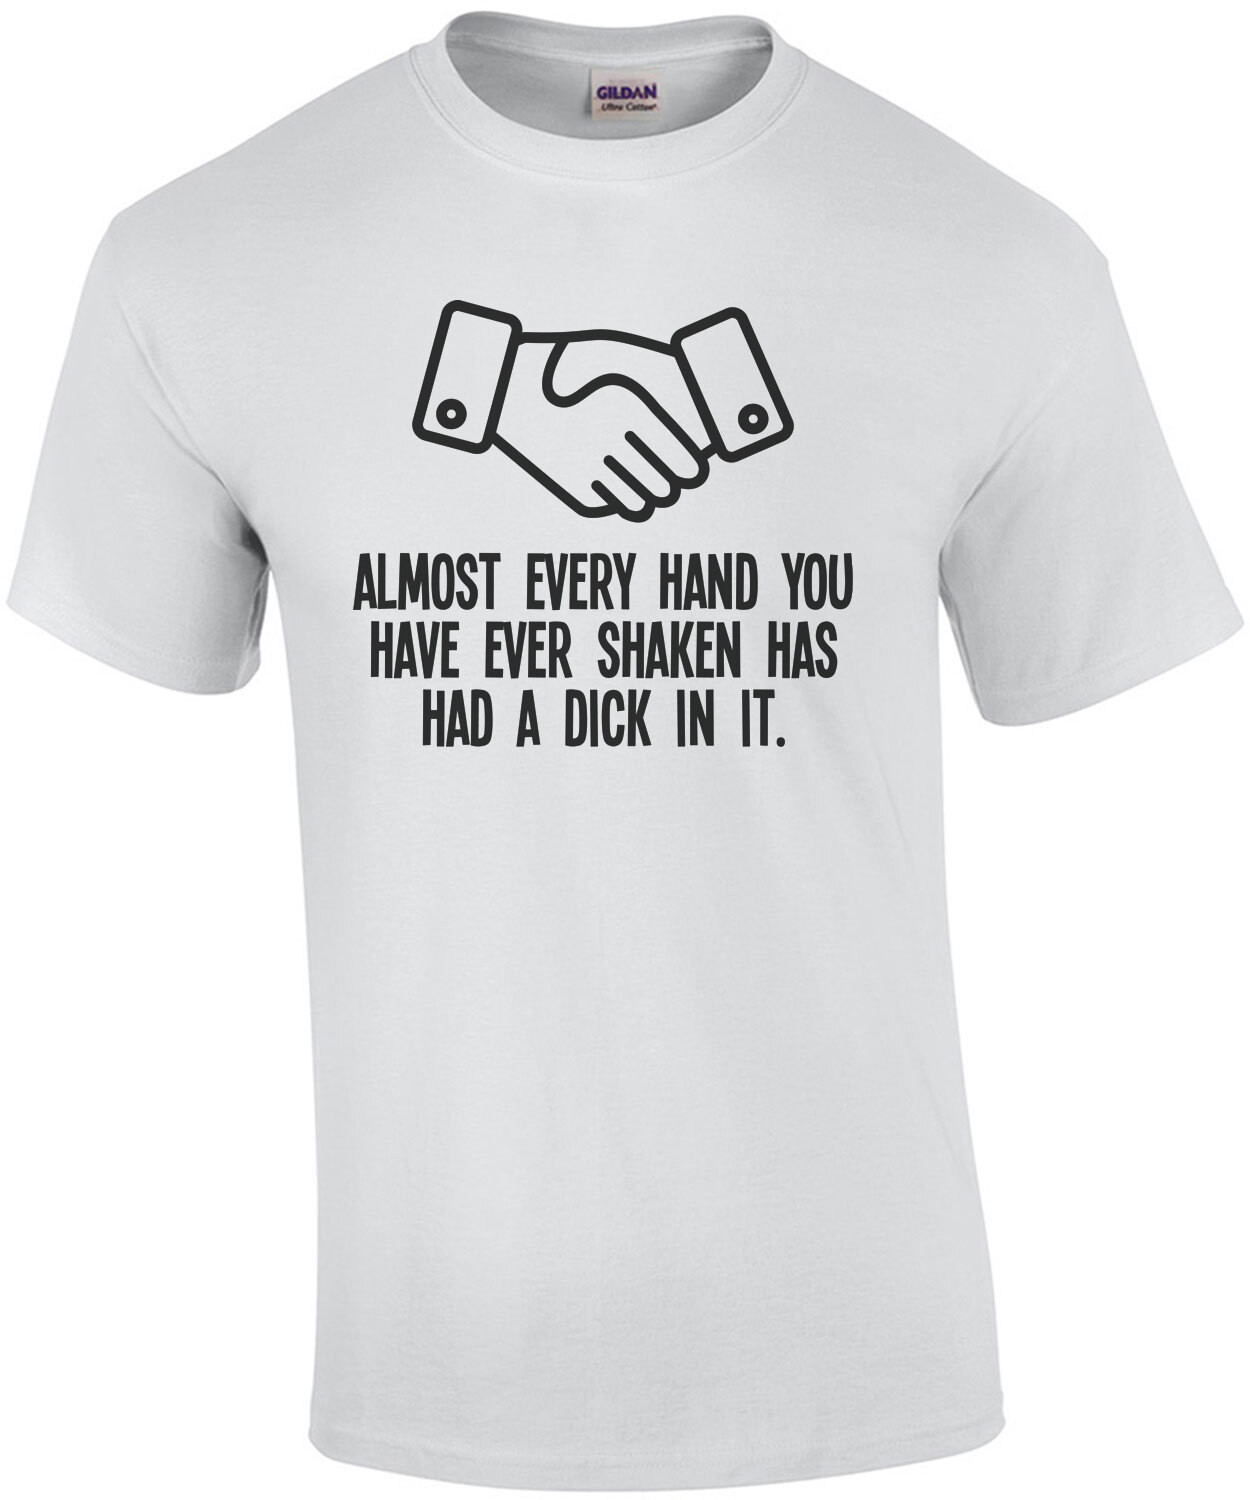 Almost Every Hand You Have Ever Shaken Has Had a Dick In It Funny Tee